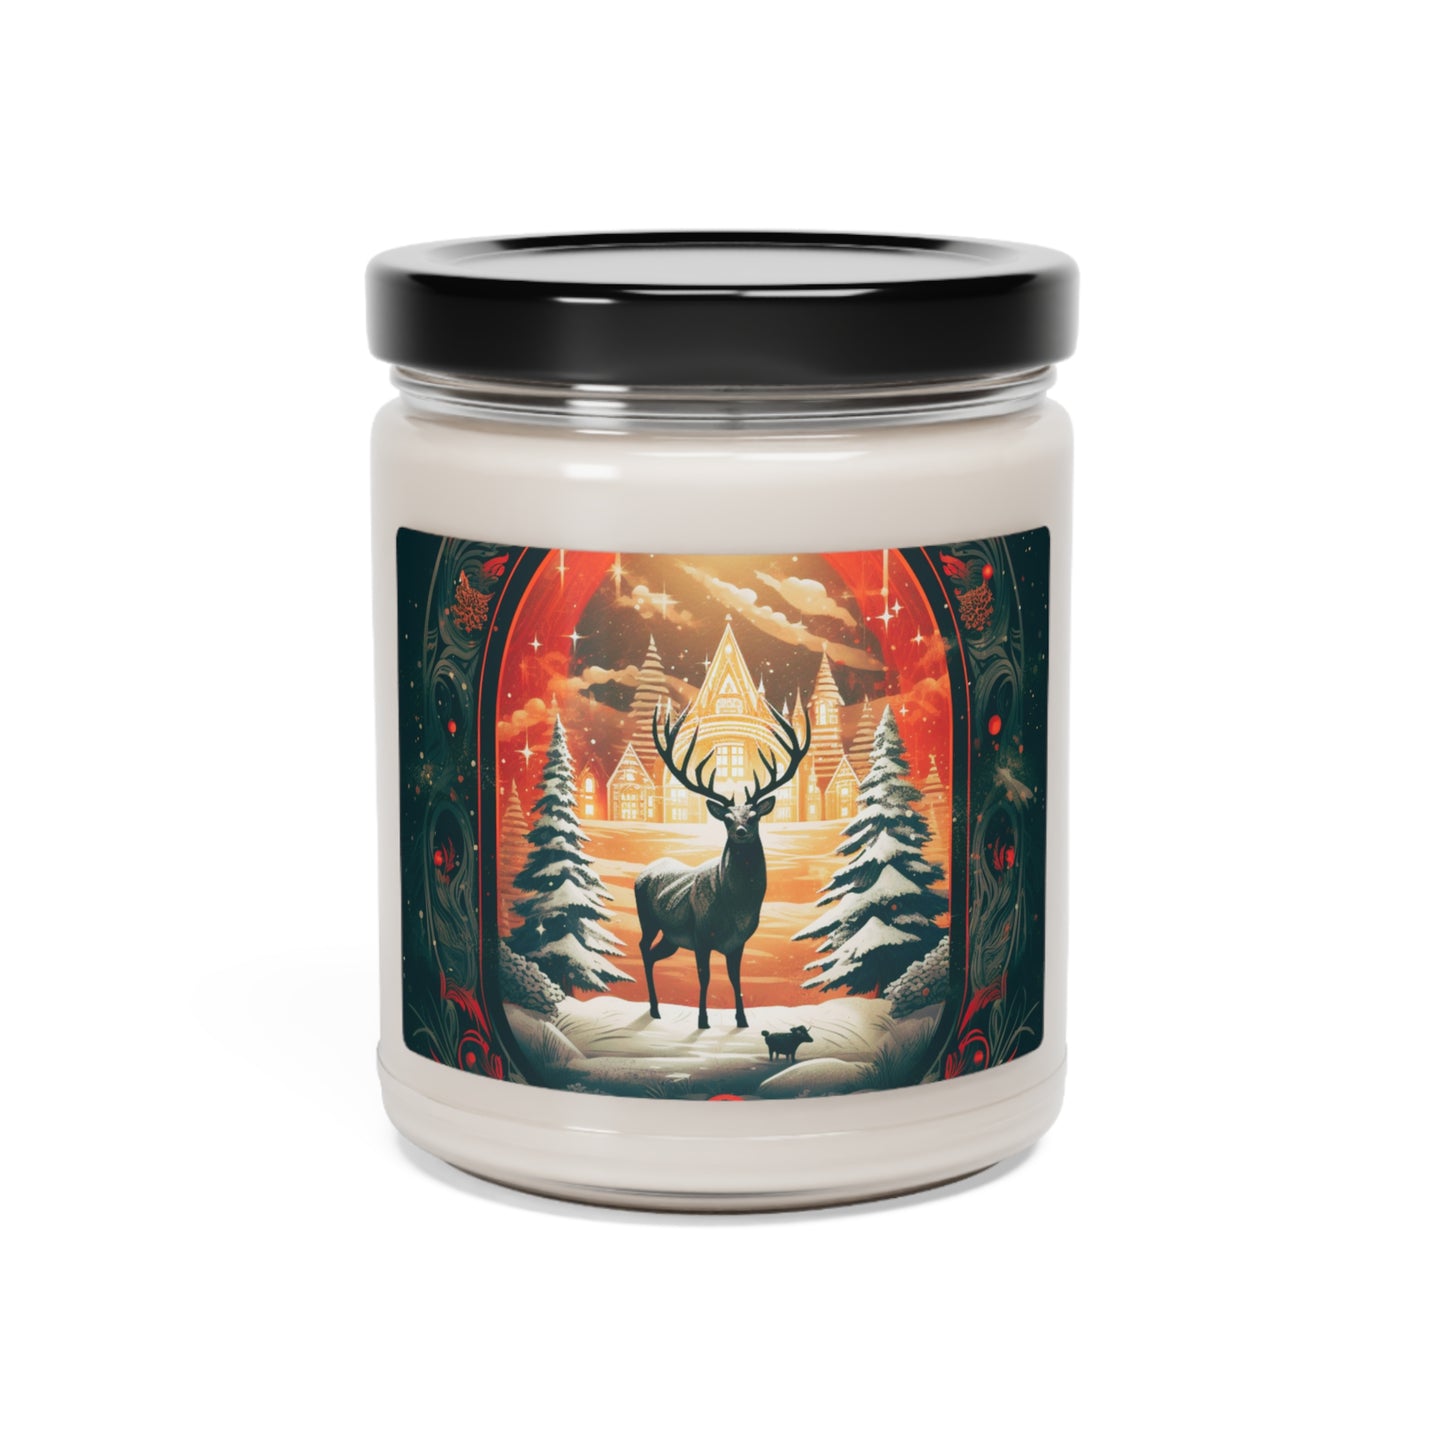 Reindeer in the winter | Scented Soy Candle | 9oz |  50-60 hours of Burning Time